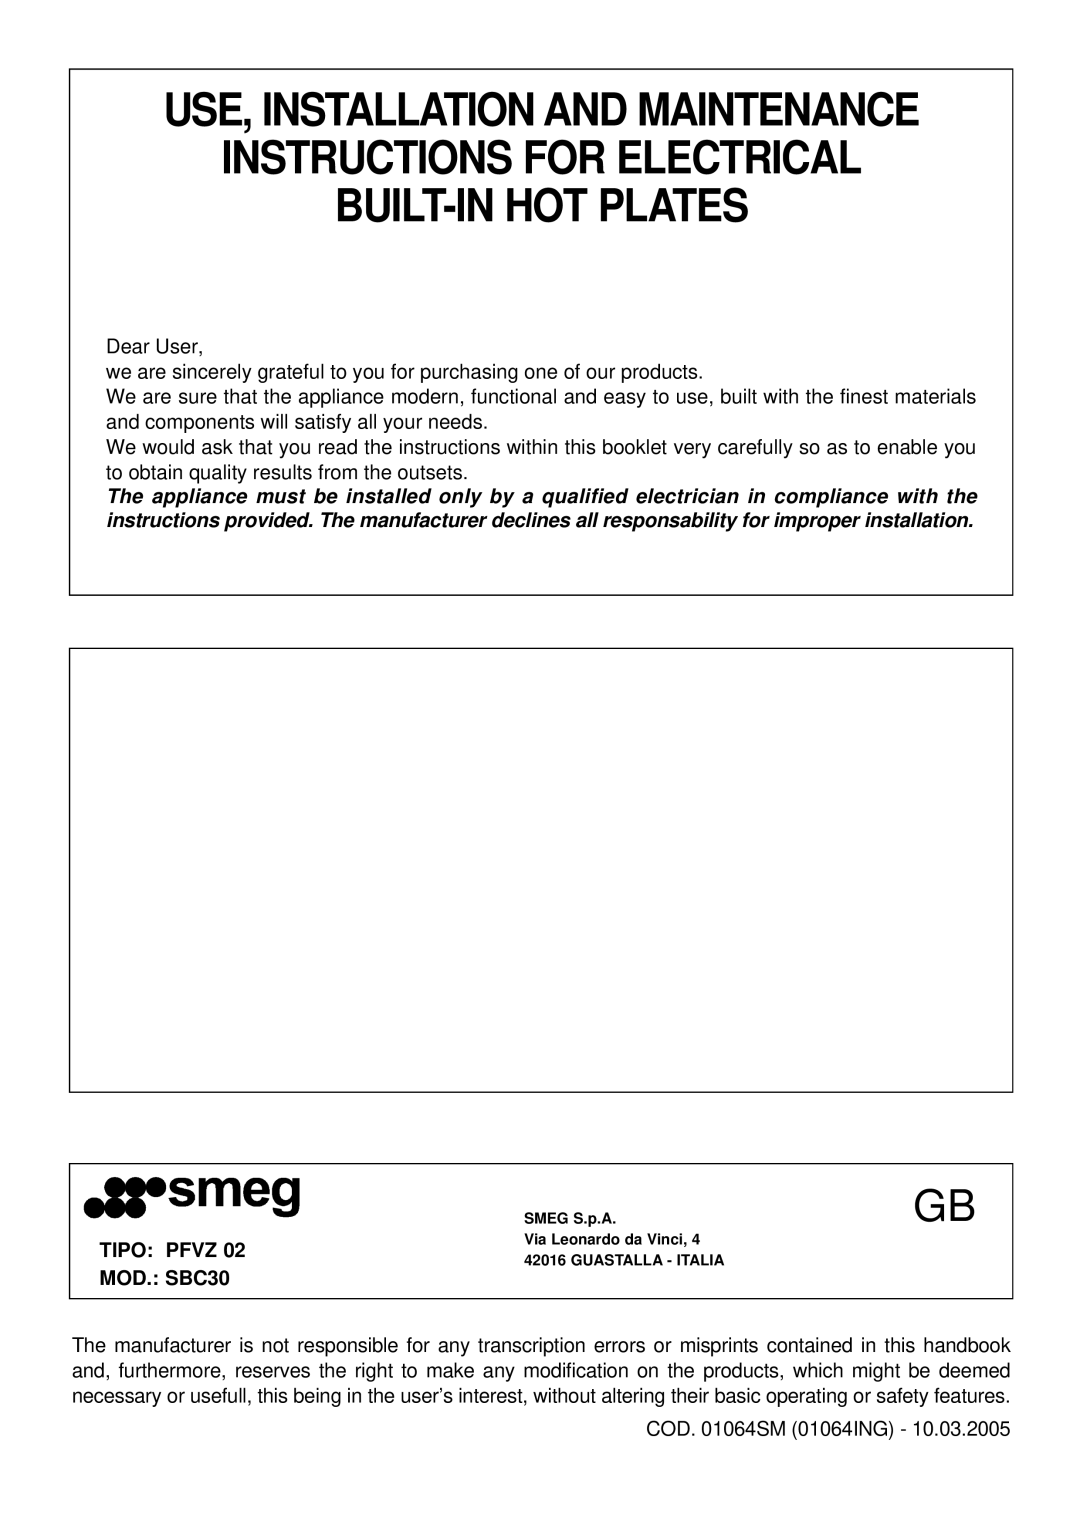 Smeg SBC30 manual Use, Installation And Maintenance, Instructions For Electrical Built-Inhot Plates 